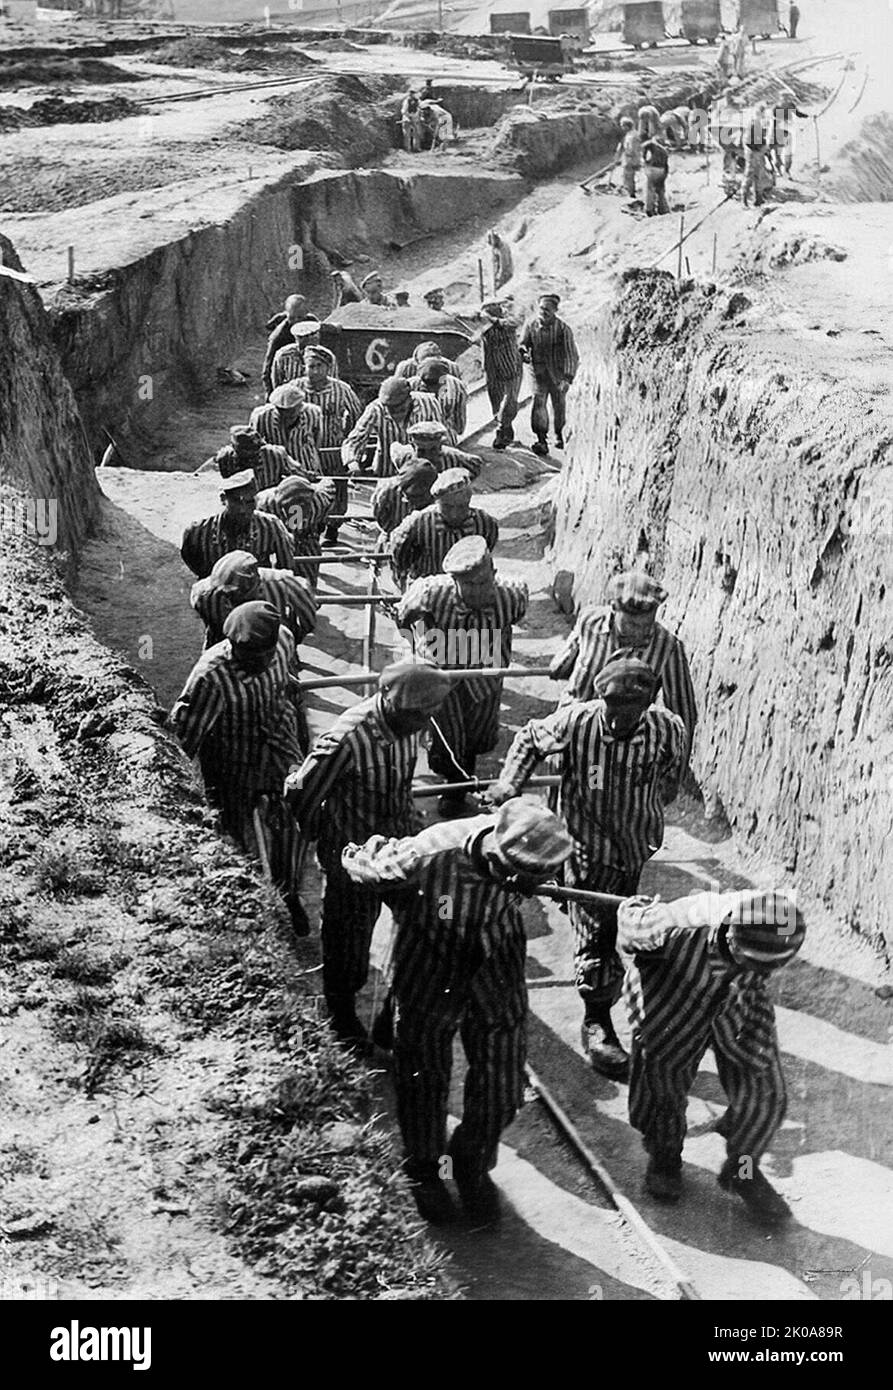 From 1933 to 1945, Nazi Germany operated more than a thousand concentration camps on its own territory and in parts of German-occupied Europe. The first camps were established in March 1933 immediately after Adolf Hitler became Chancellor of Germany. Initially, most prisoners were members of the Communist Party of Germany, but as time went on different groups were arrested, including 'habitual criminals', 'asocials', and Jews Stock Photo